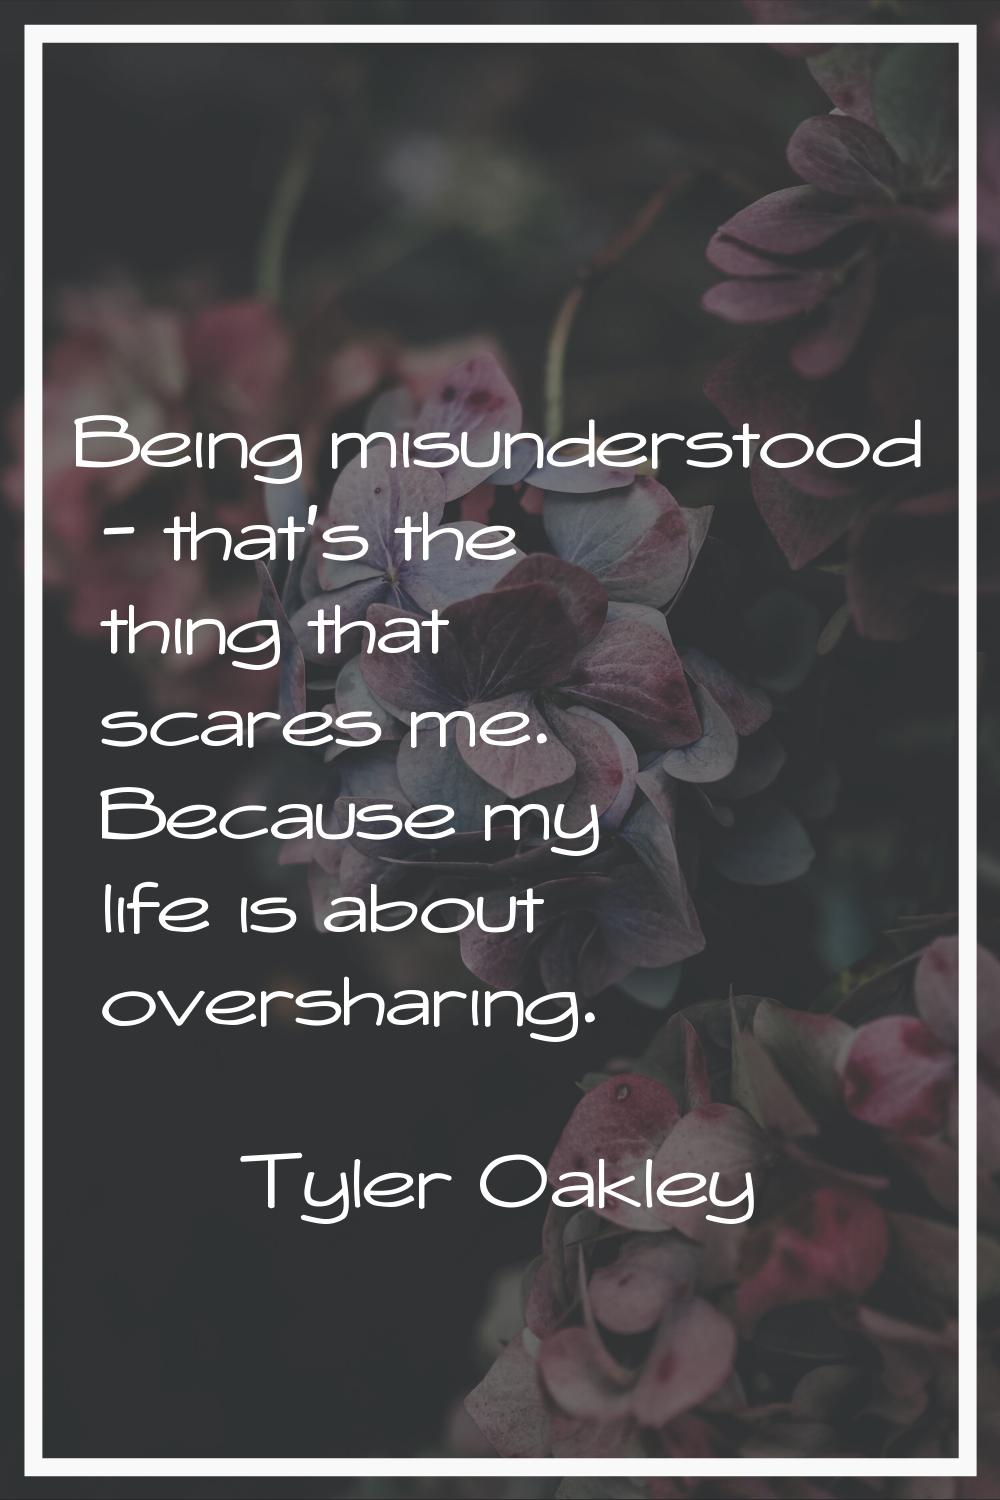 Being misunderstood - that's the thing that scares me. Because my life is about oversharing.